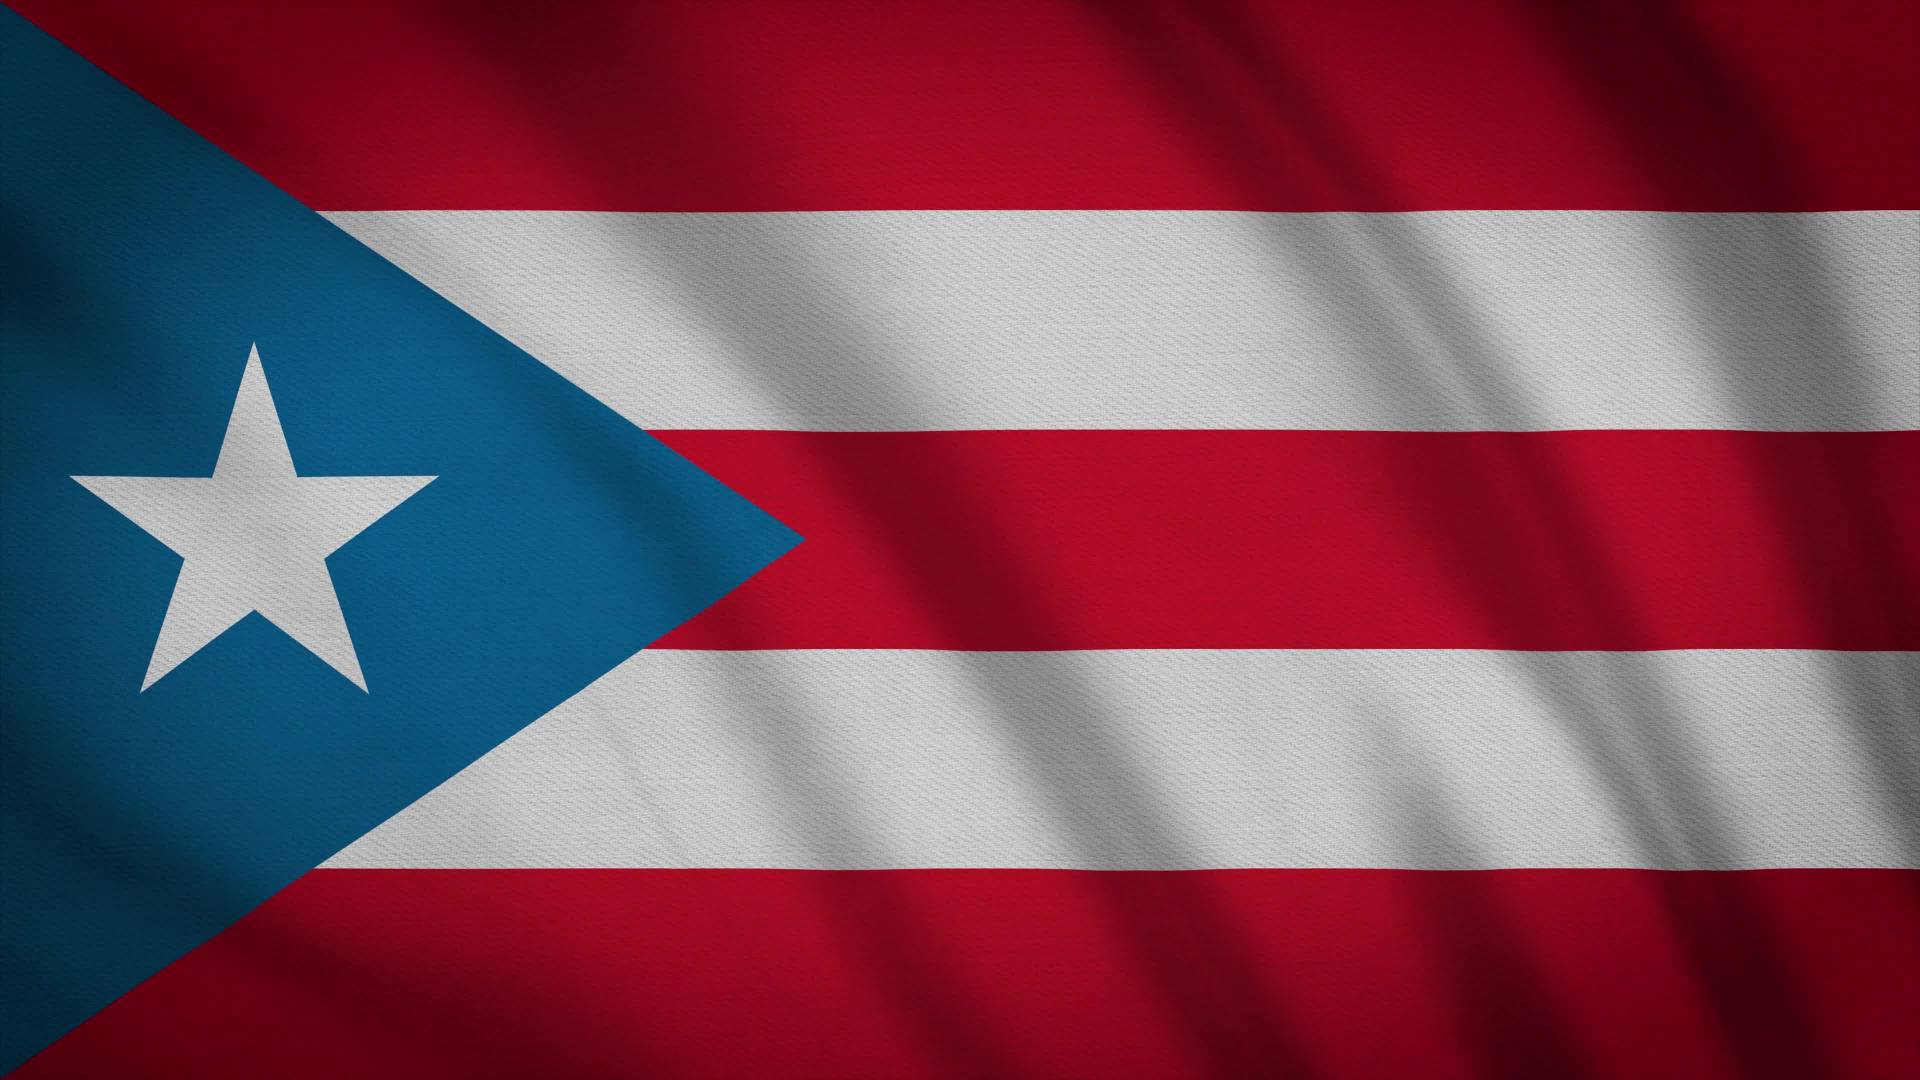 1920x1080 Puerto Rico Flag Free HD Video Clips \u0026 Stock Video Footage at Videezy